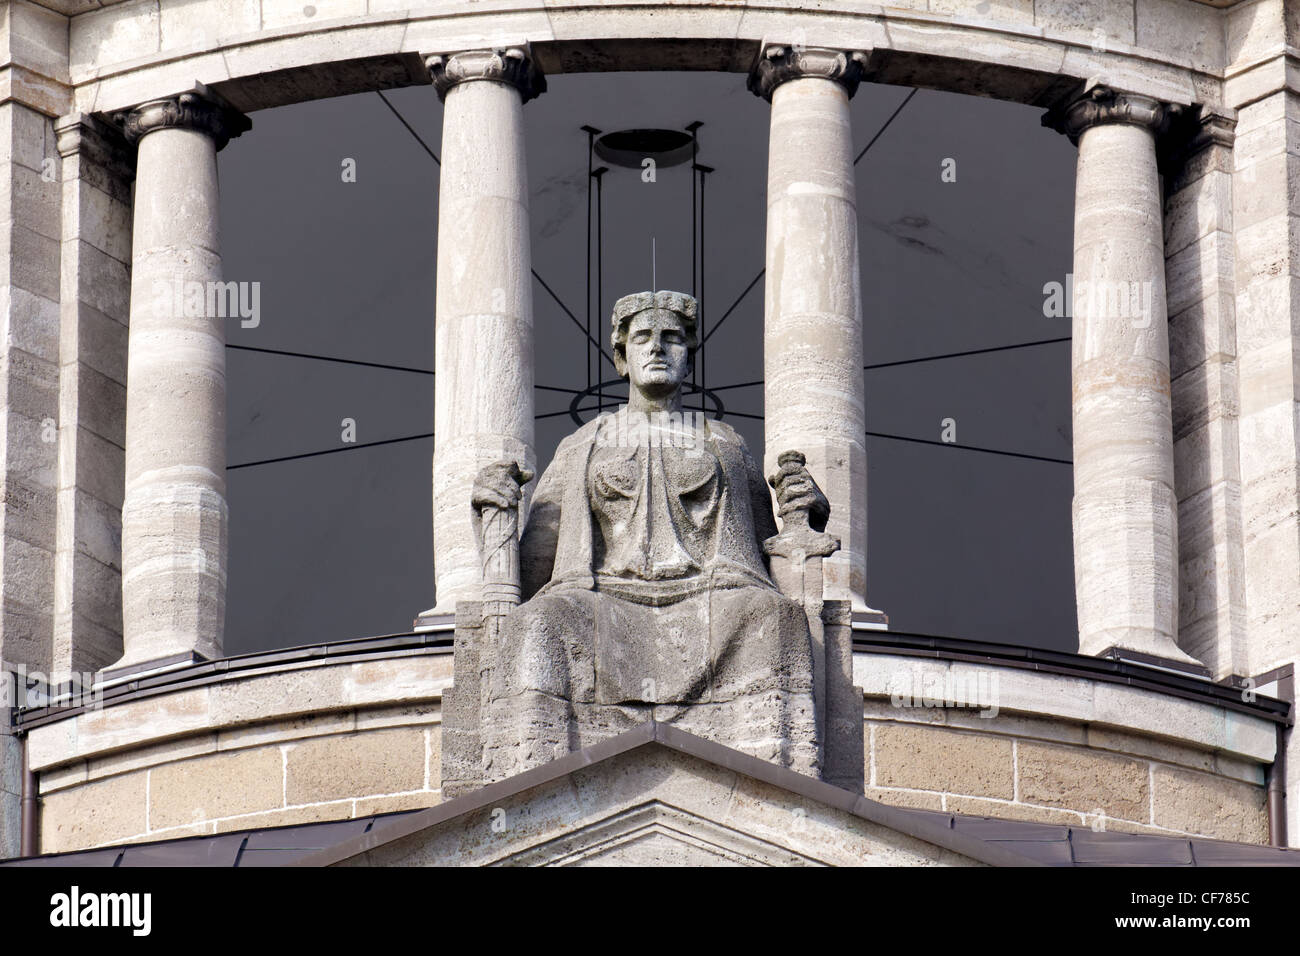 Justitia, Lady Justice, sitting above the portal of the Hanseatisches Oberlandesgericht (Hanseatic Supreme Court) of Hamburg. Stock Photo